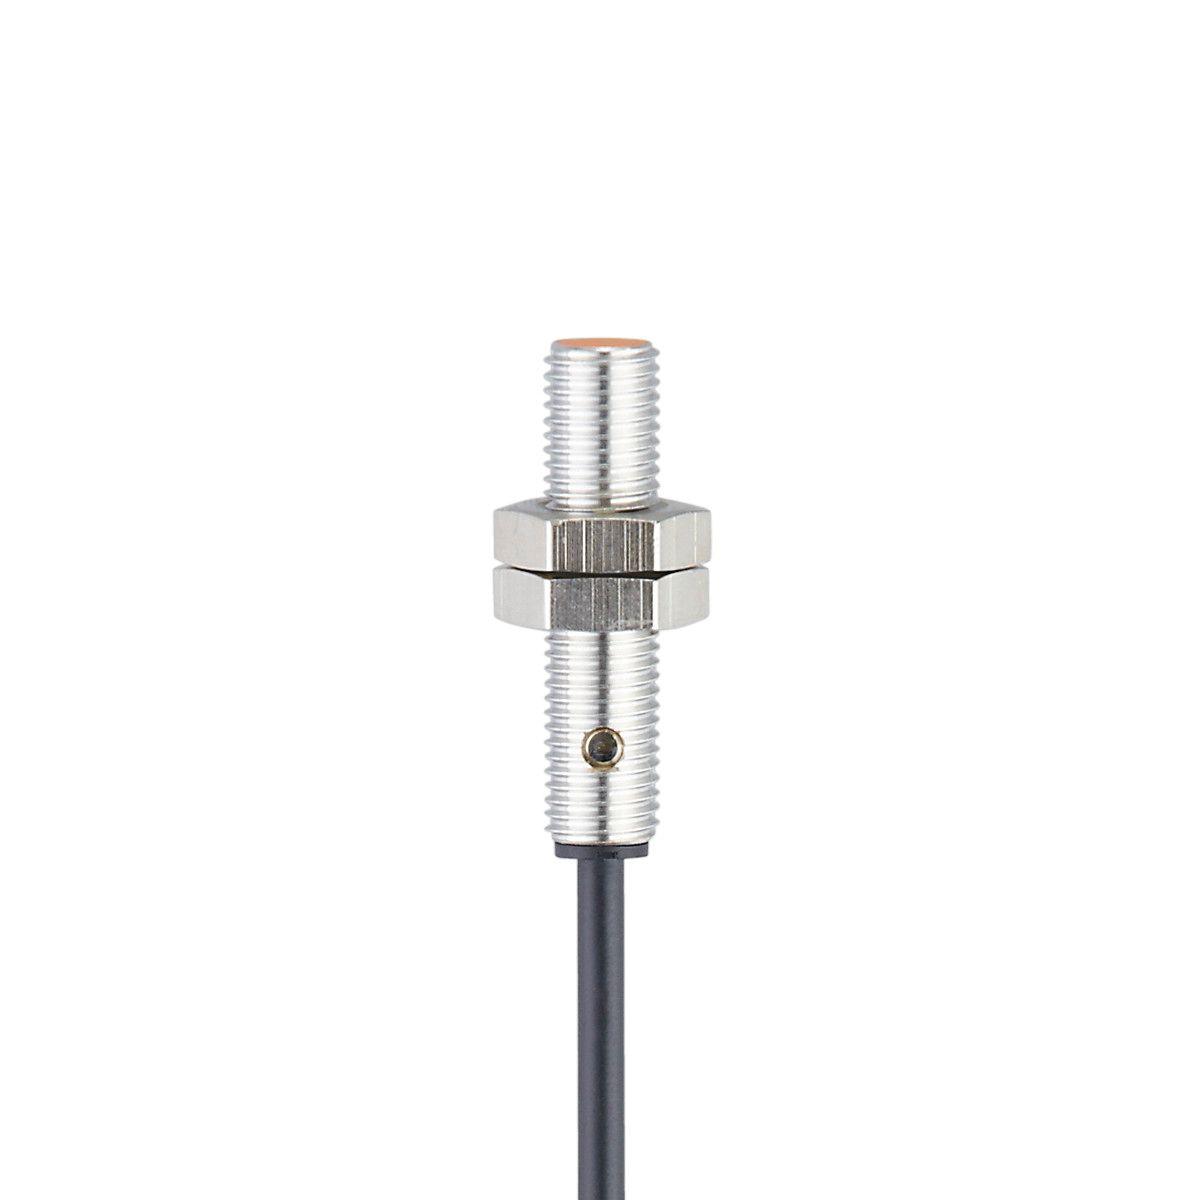 ifm Electronic IE5086 Inductive sensor, Particularly short housing, Electrical design: NPN, Output function: normally closed, Sensing range [mm]: 1, Housing: Threaded type, Dimensions [mm]: M8 x 1 / L = 35